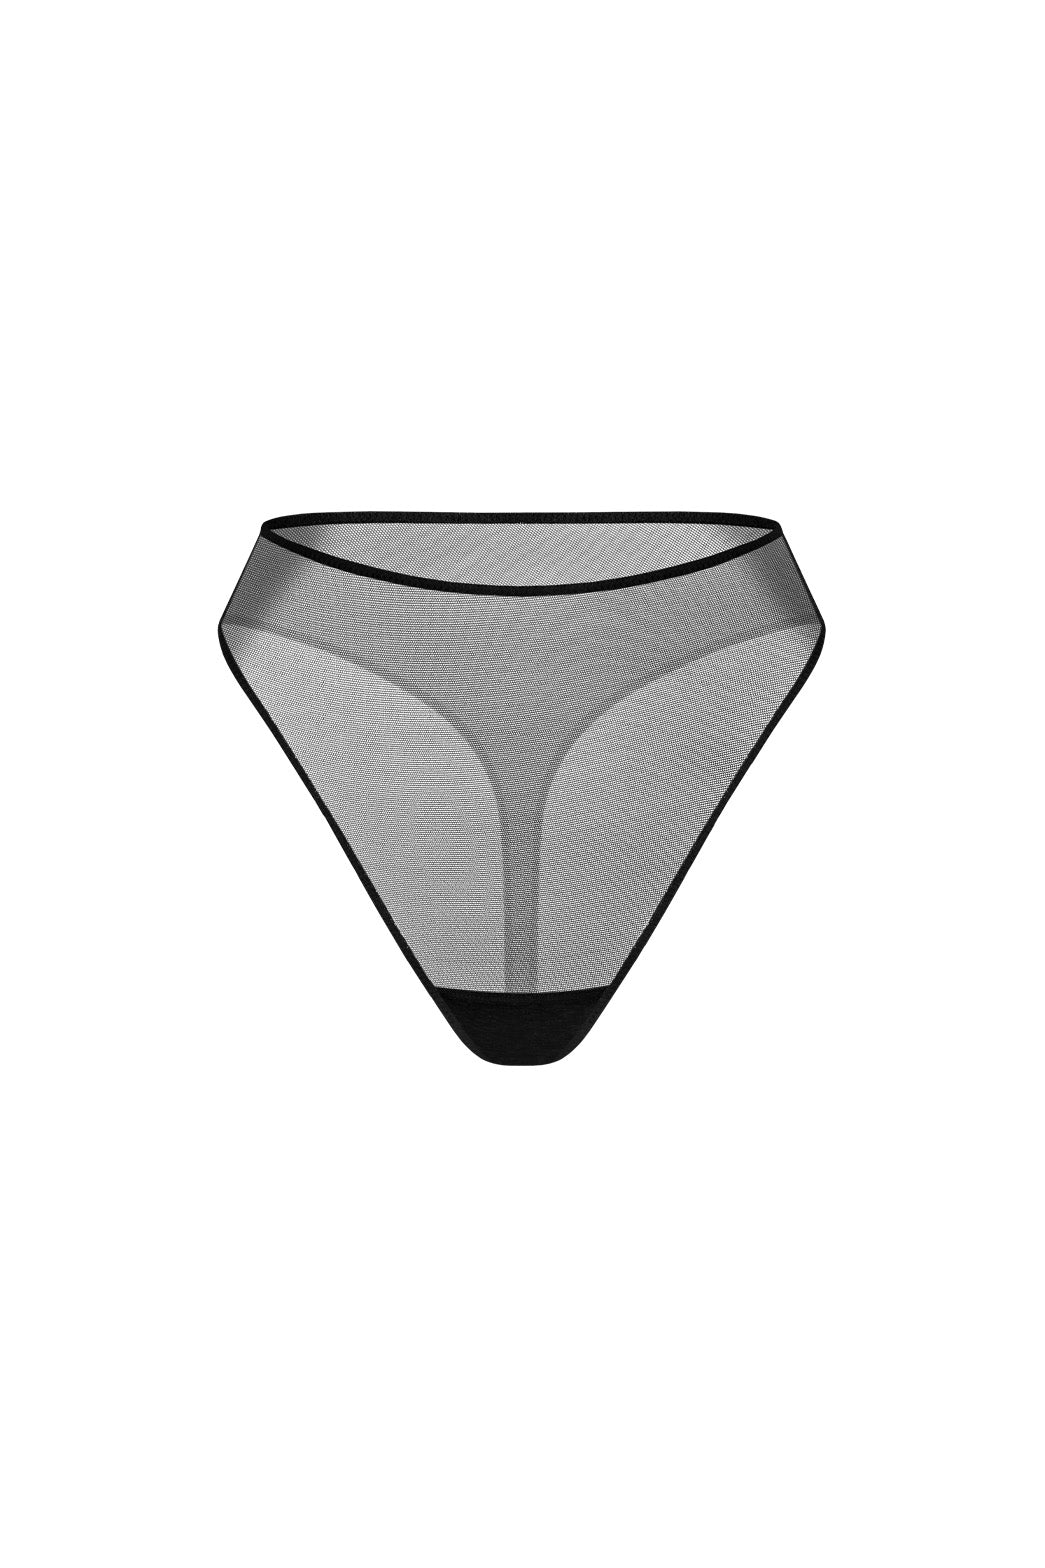 High waist panties - Discover our collection